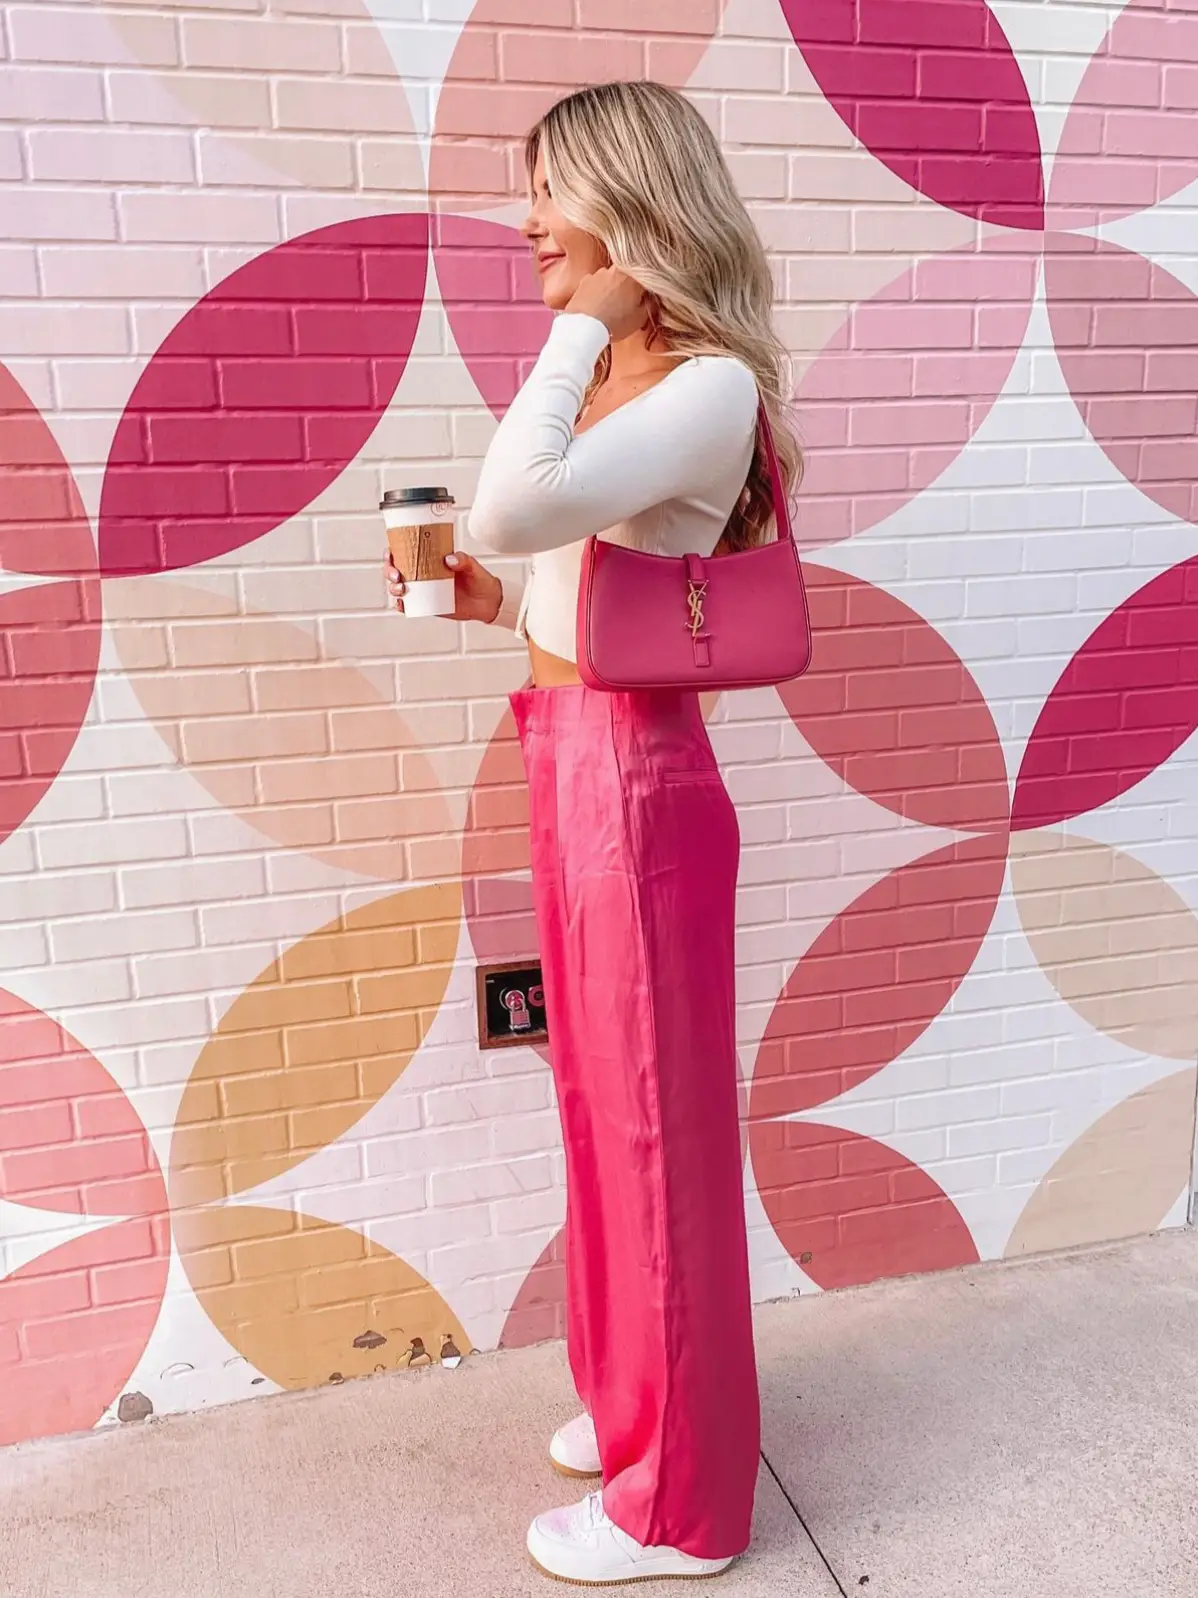 Hot Pink Pants Casual Warm Weather Outfits For Women (12 ideas & outfits)